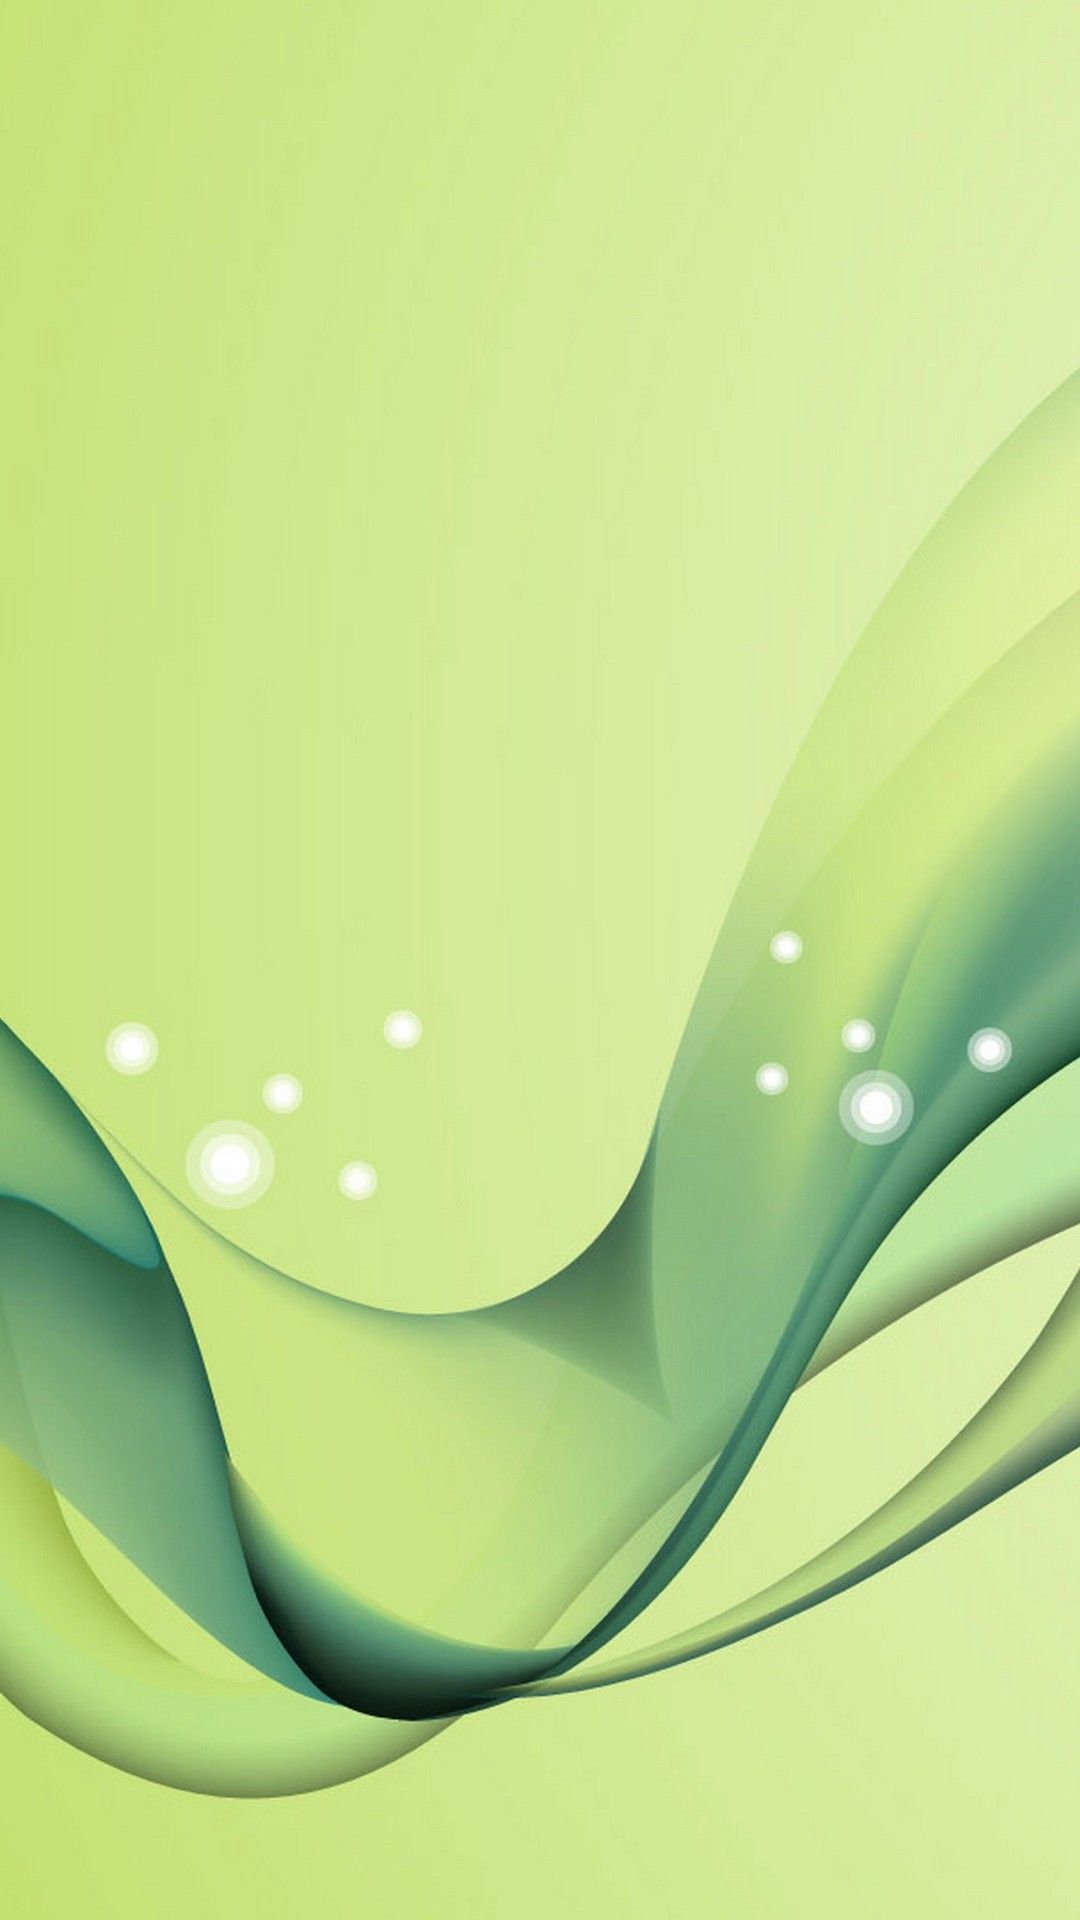 New Green Color Abstract Modern Shapes Background Wallpaper Concept Design  Latest New Shapes Stock Illustration  Illustration of backdrop modern  225727310